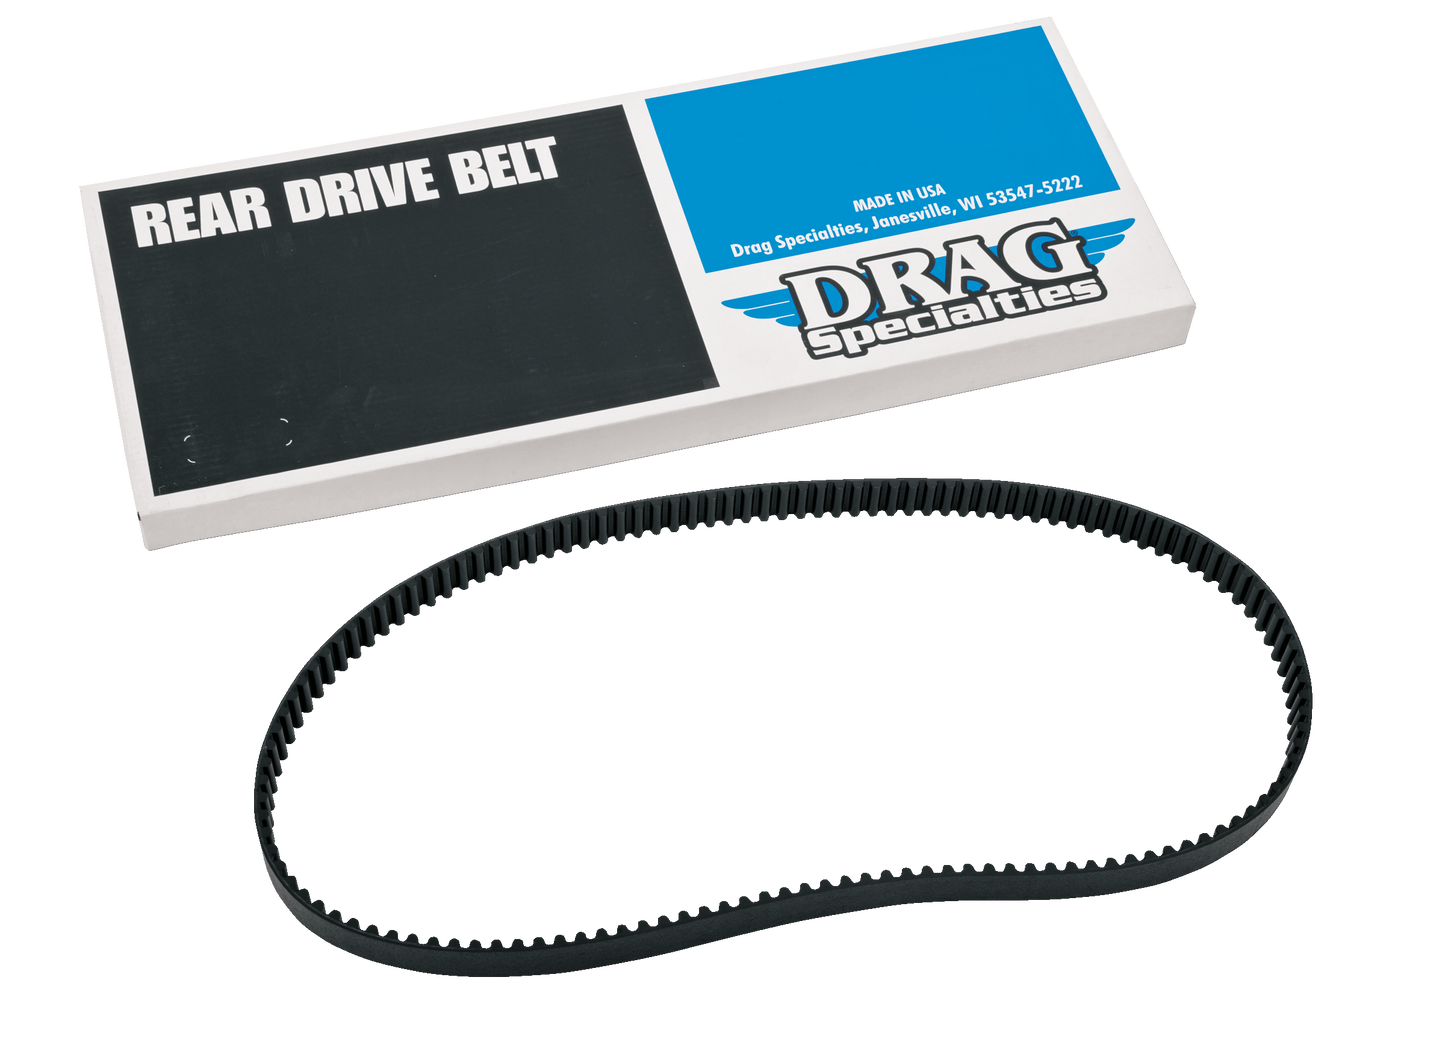 DRAG SPECIALTIES Rear Drive Belt - 133 Tooth - 20mm CANNOT SHIP APP BDL SPC-133-20